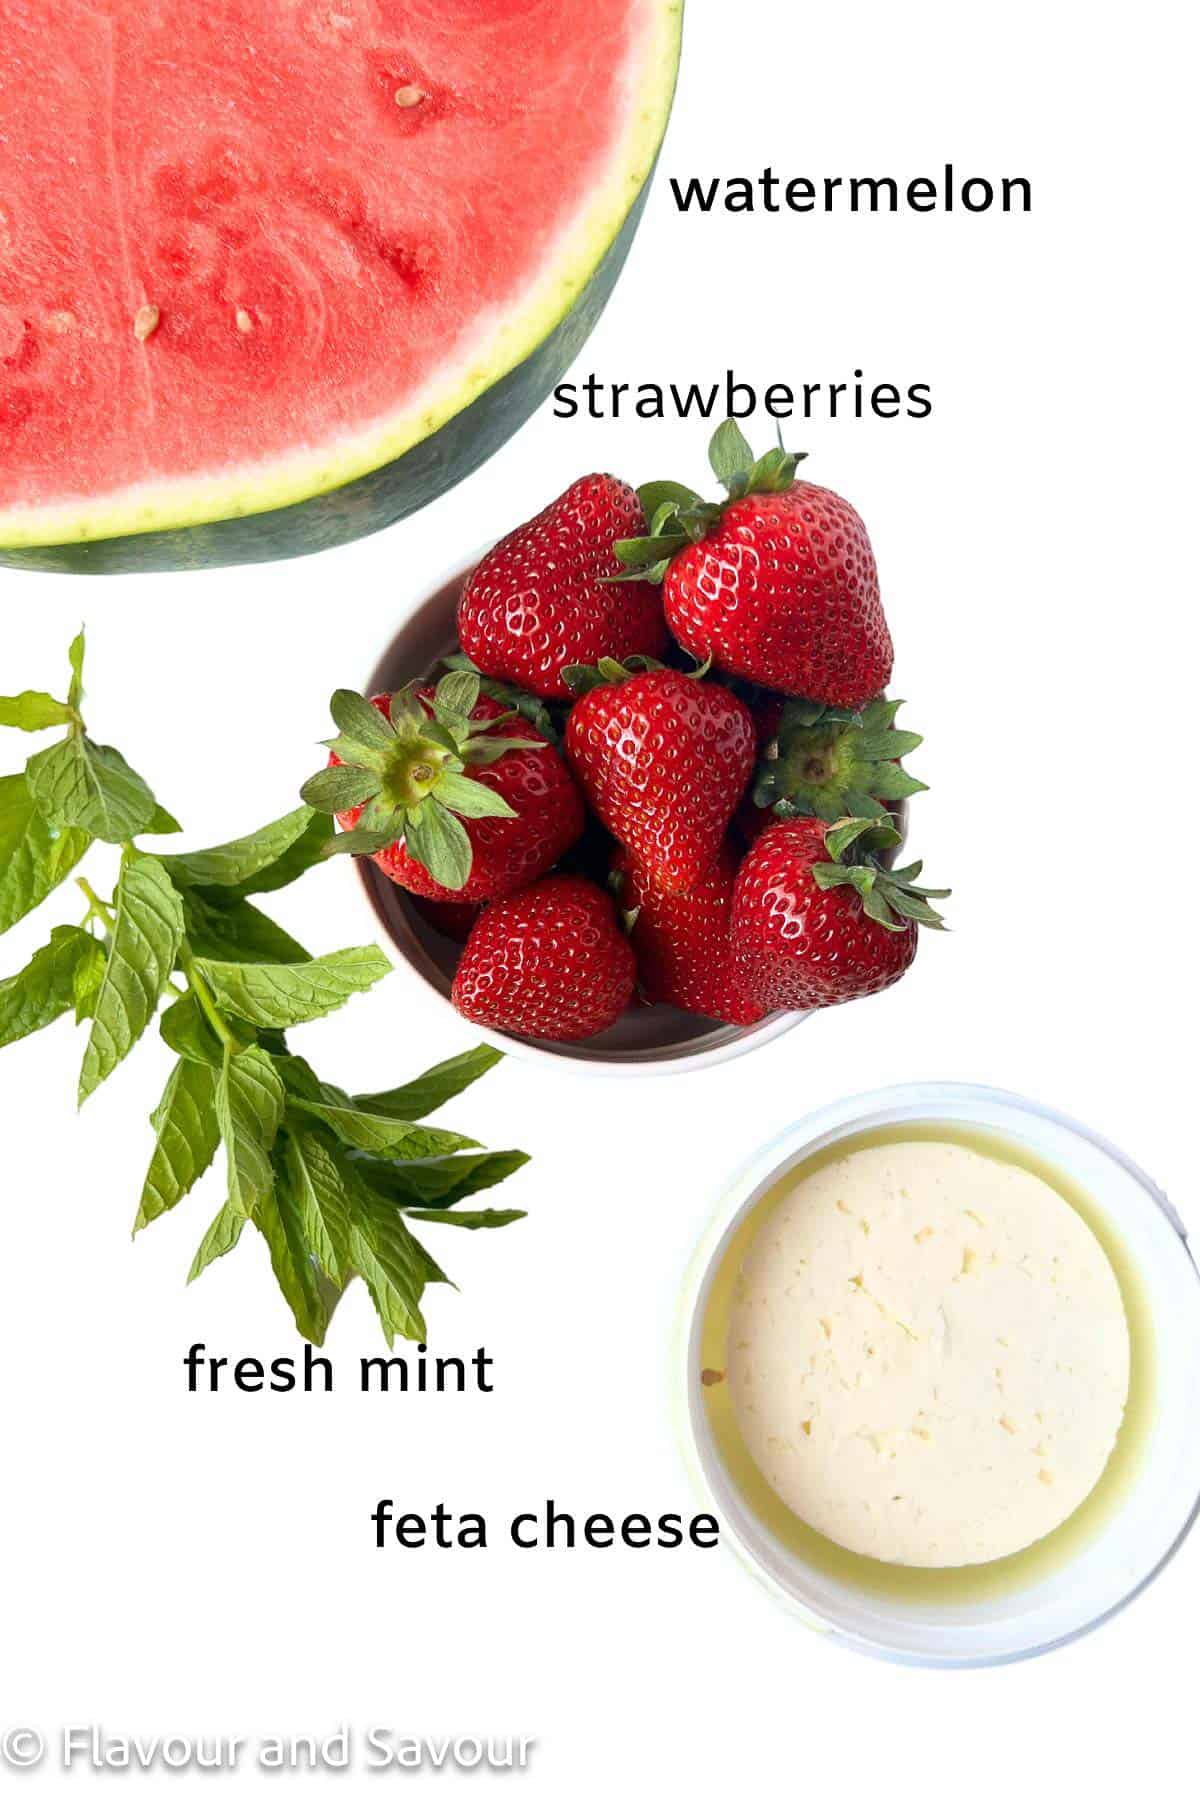 Ingredients for strawberry watermelon salad: watermelon, strawberries, feta cheese and mint leaves.